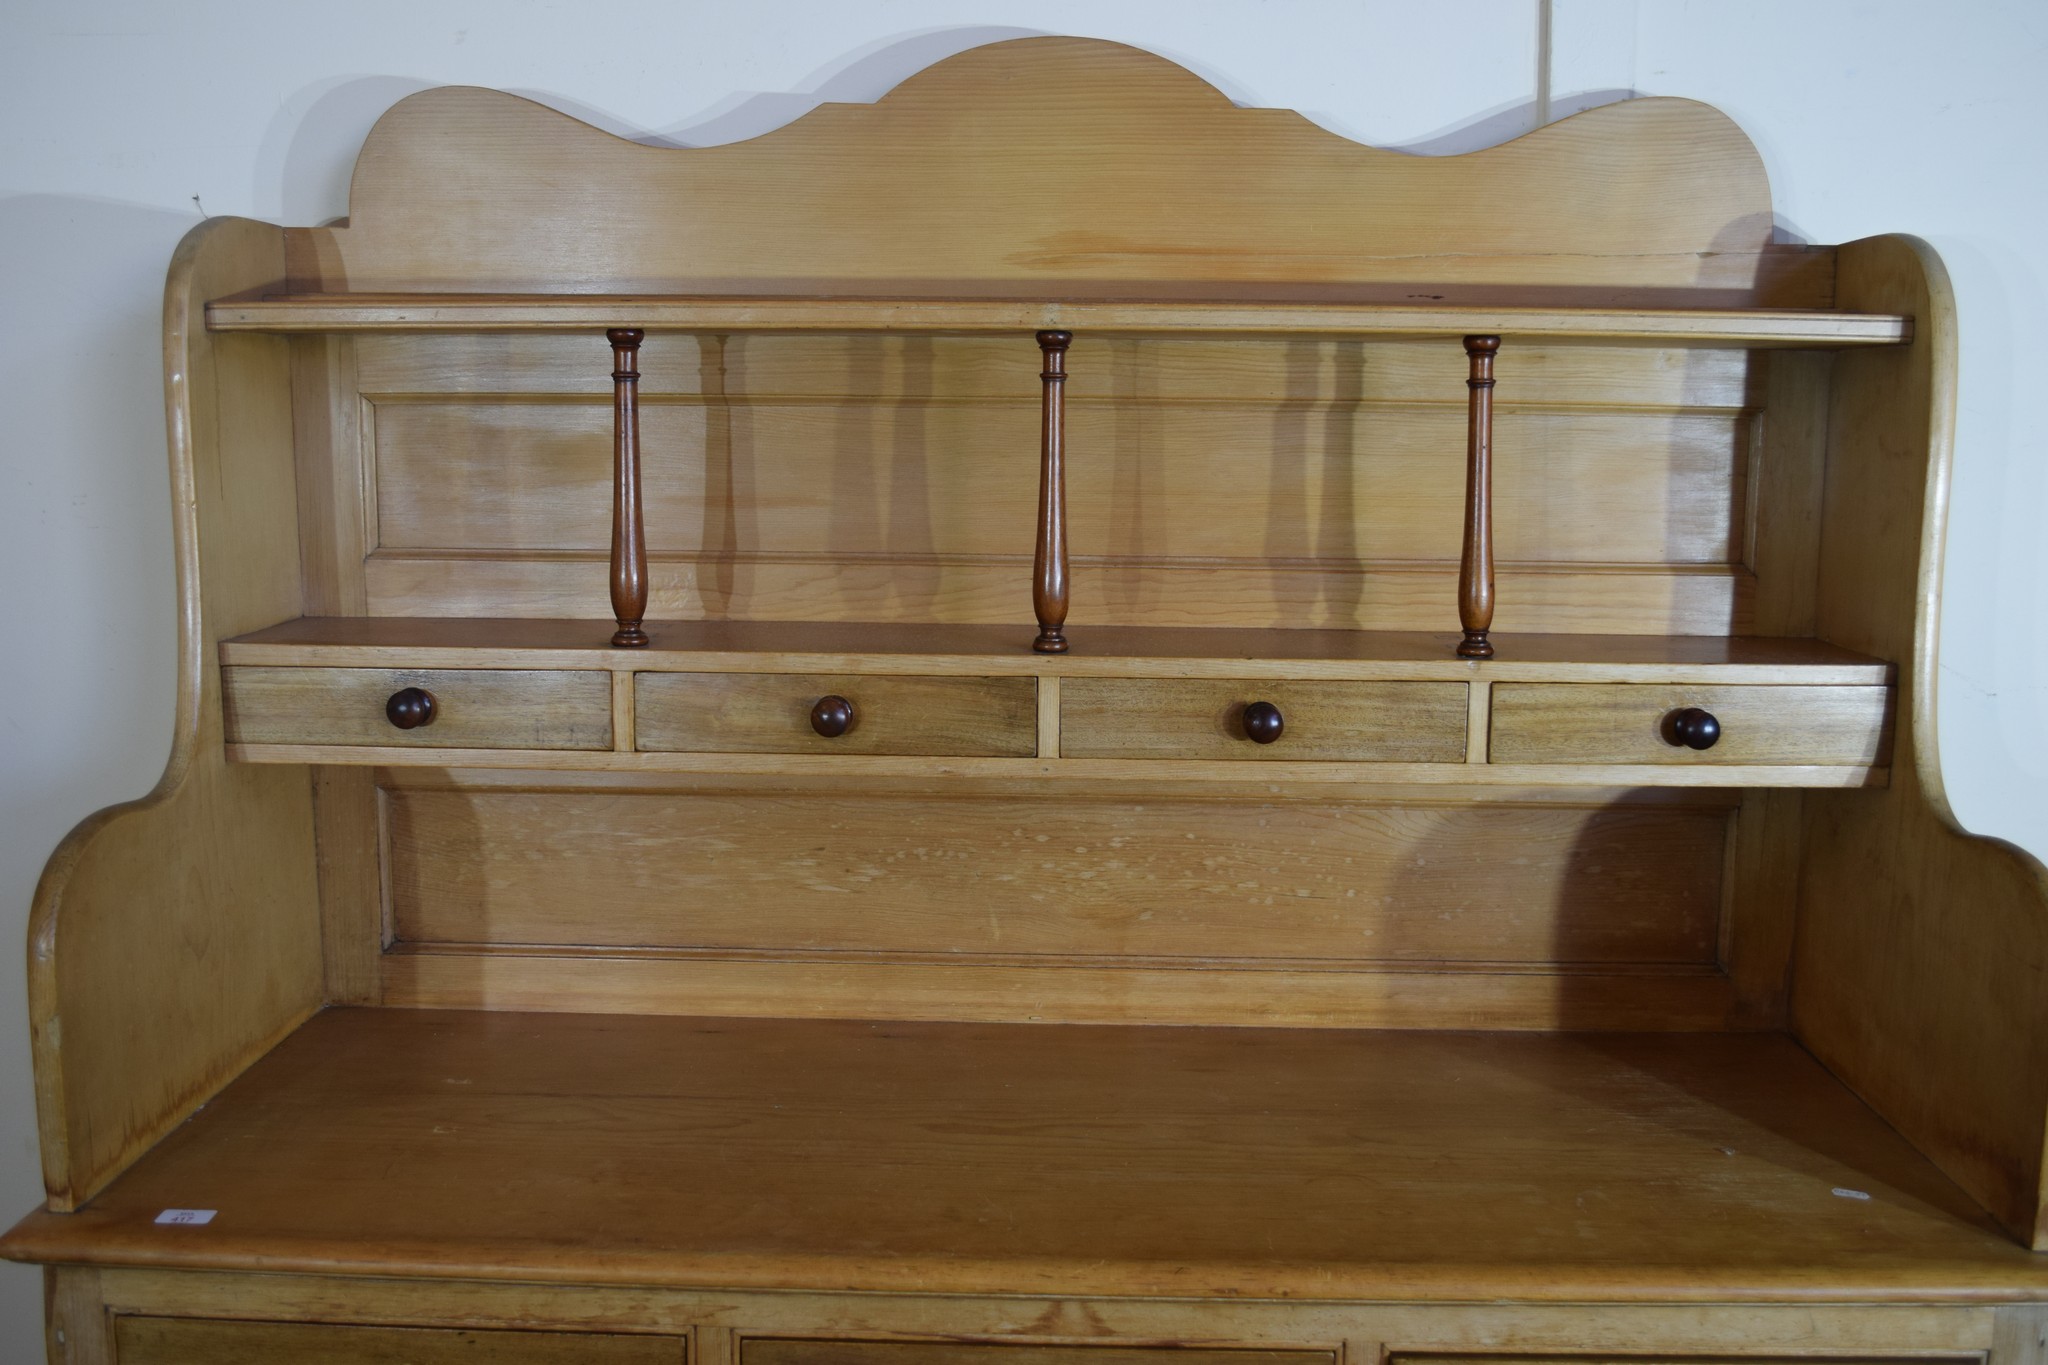 LARGE HEAVY EARLY 20TH CENTURY KITCHEN DRESSER, WIDTH APPROX 144CM - Image 2 of 4